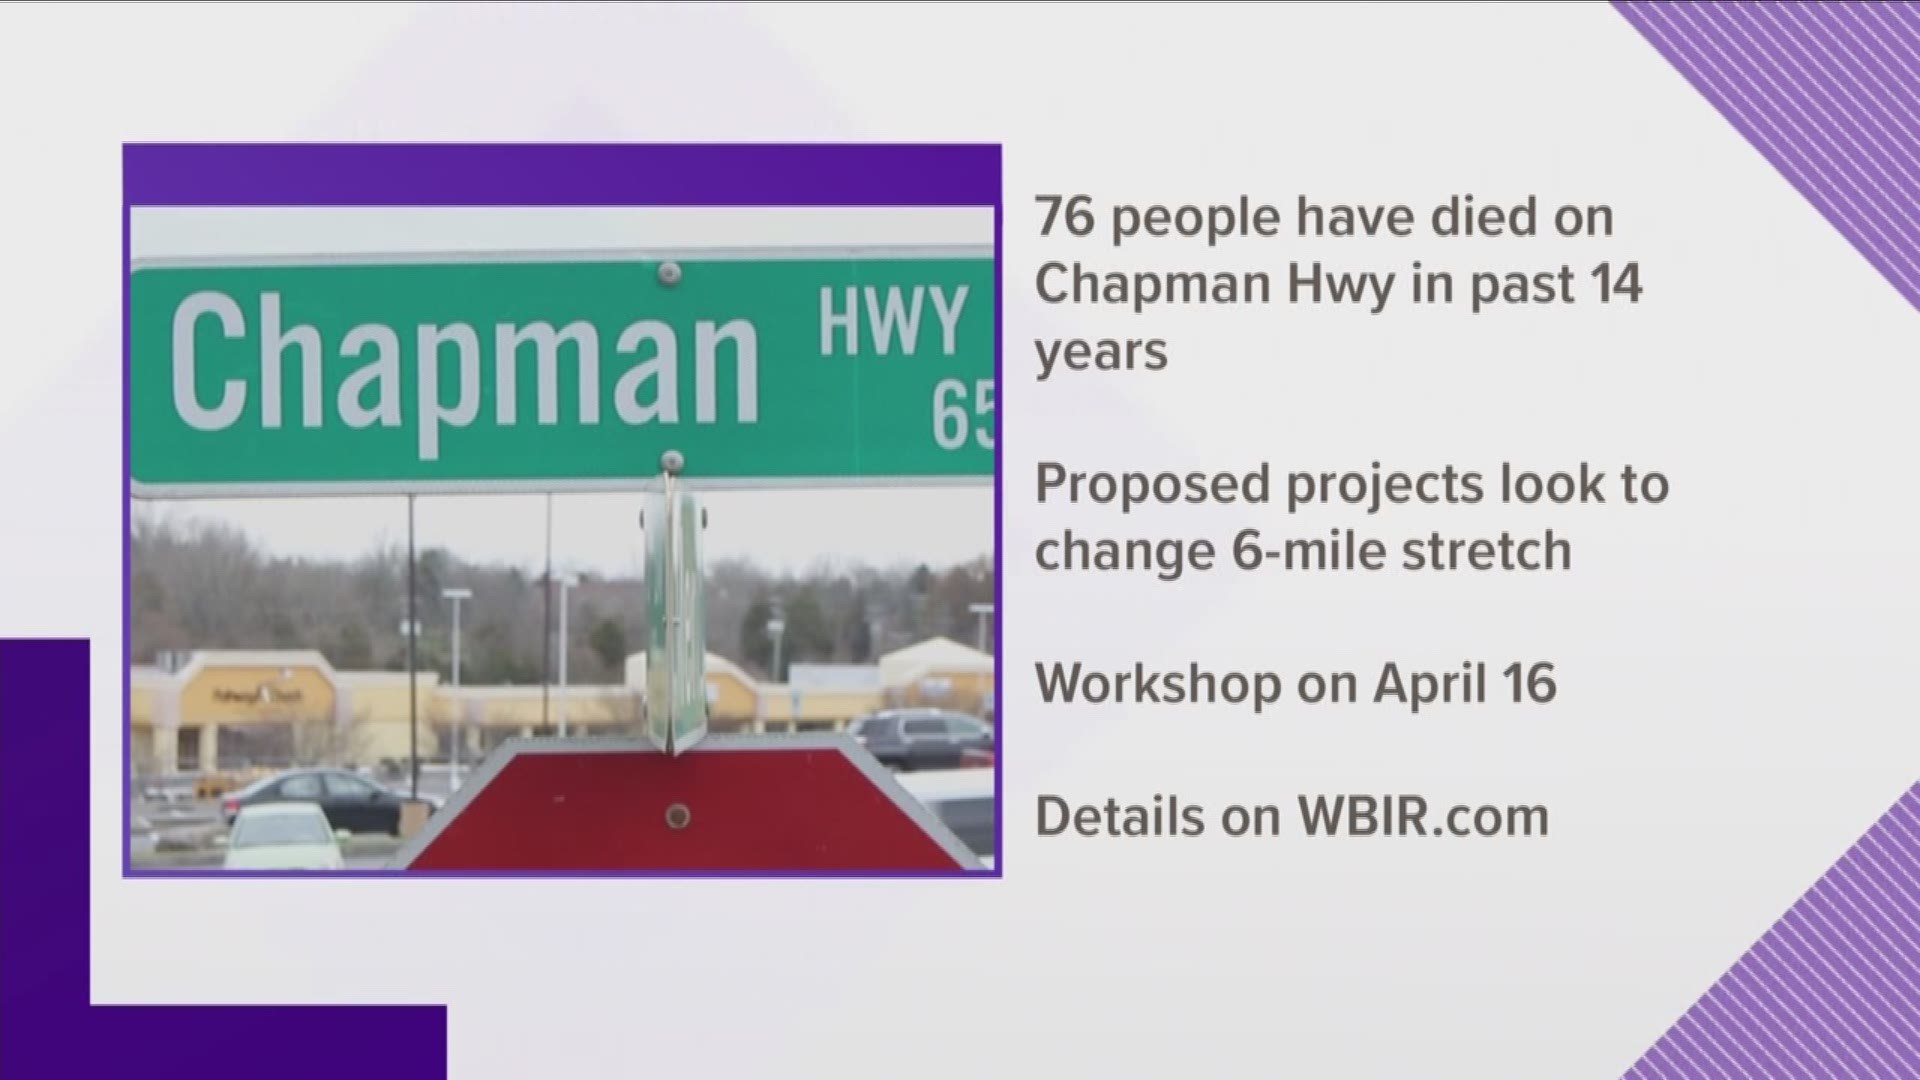 Knoxville and Knox County are asking for public feedback on proposed changes to Chapman Highway.